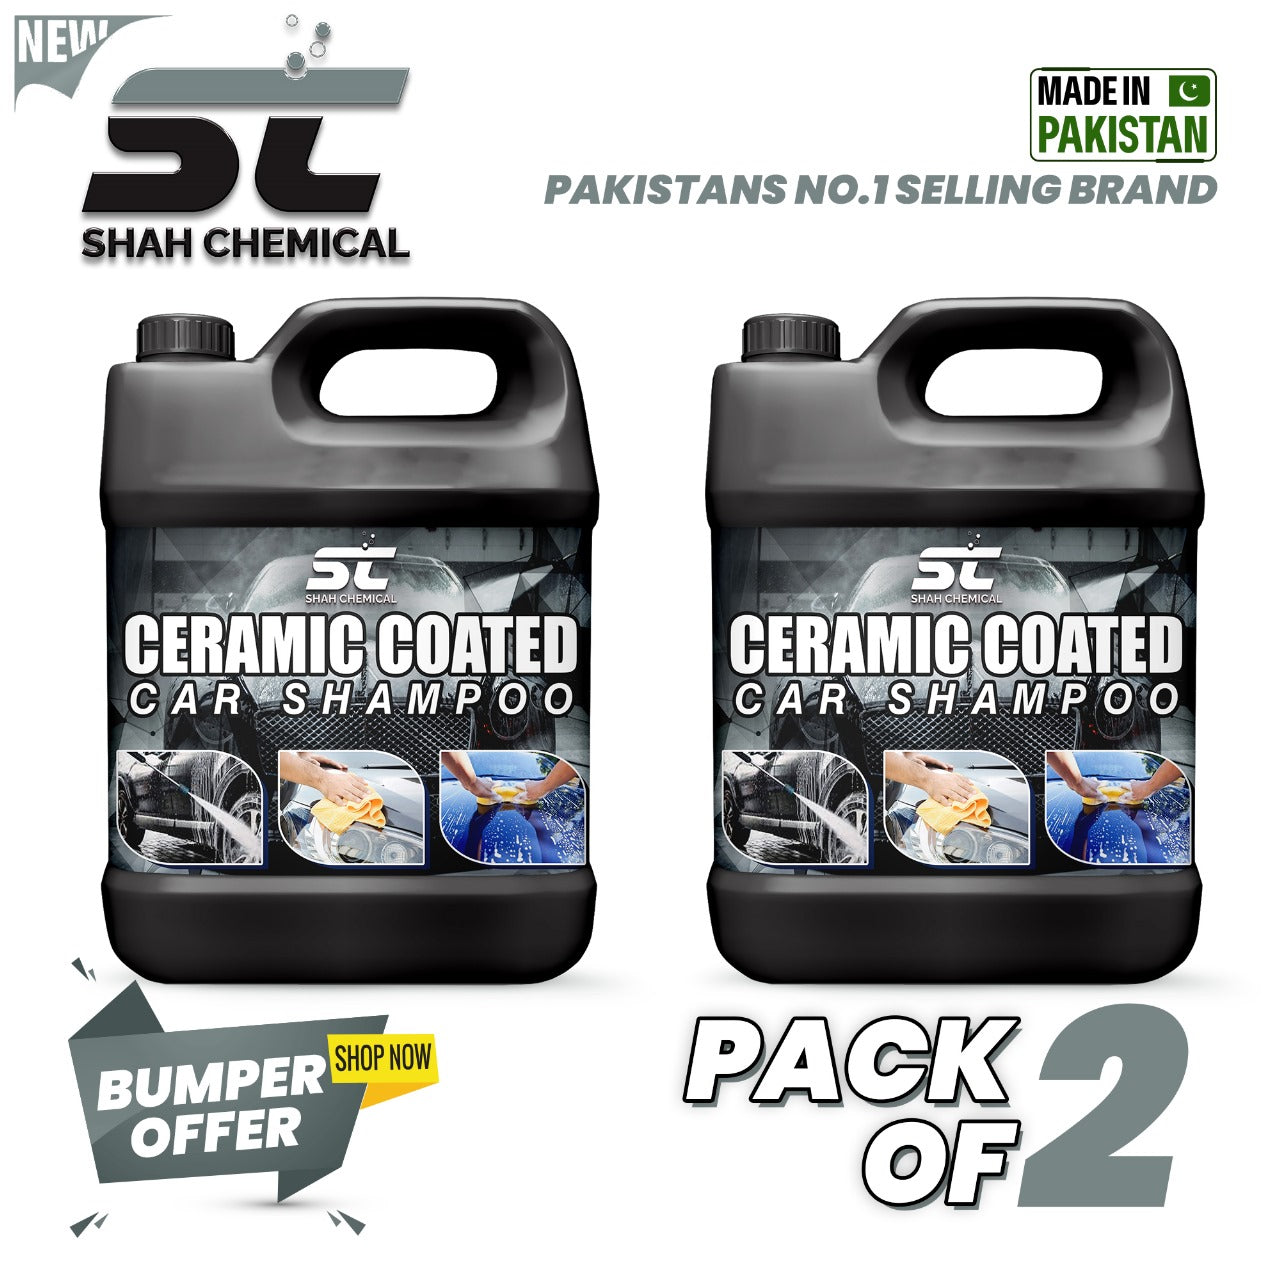 Pack of 2 Ceramic coated car wash and wax shampoo - 4 litre